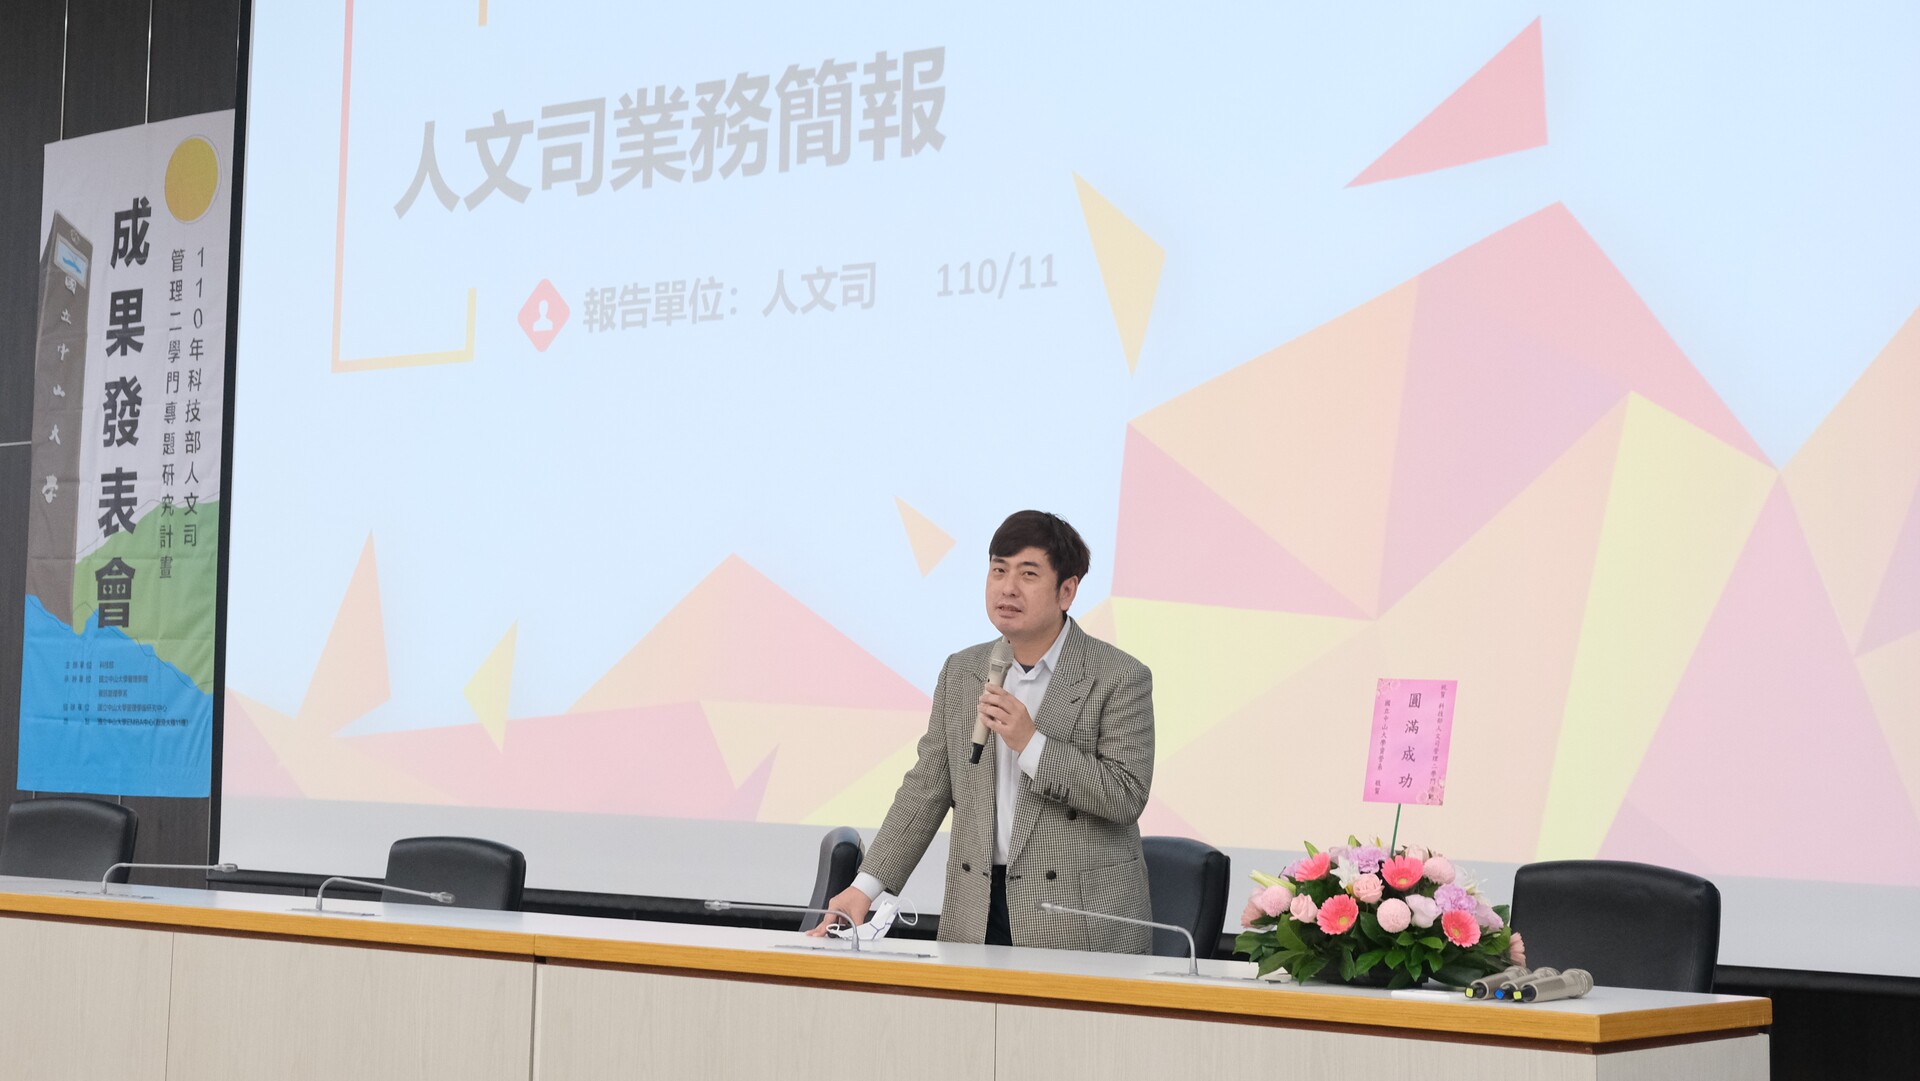 This year's presentation featured a keynote speech by Ming-Jen Lin, Professor at the Department of Economics at National Taiwan University and Director-General of the Department of Humanities and Social Sciences, Ministry of Science and Technology.